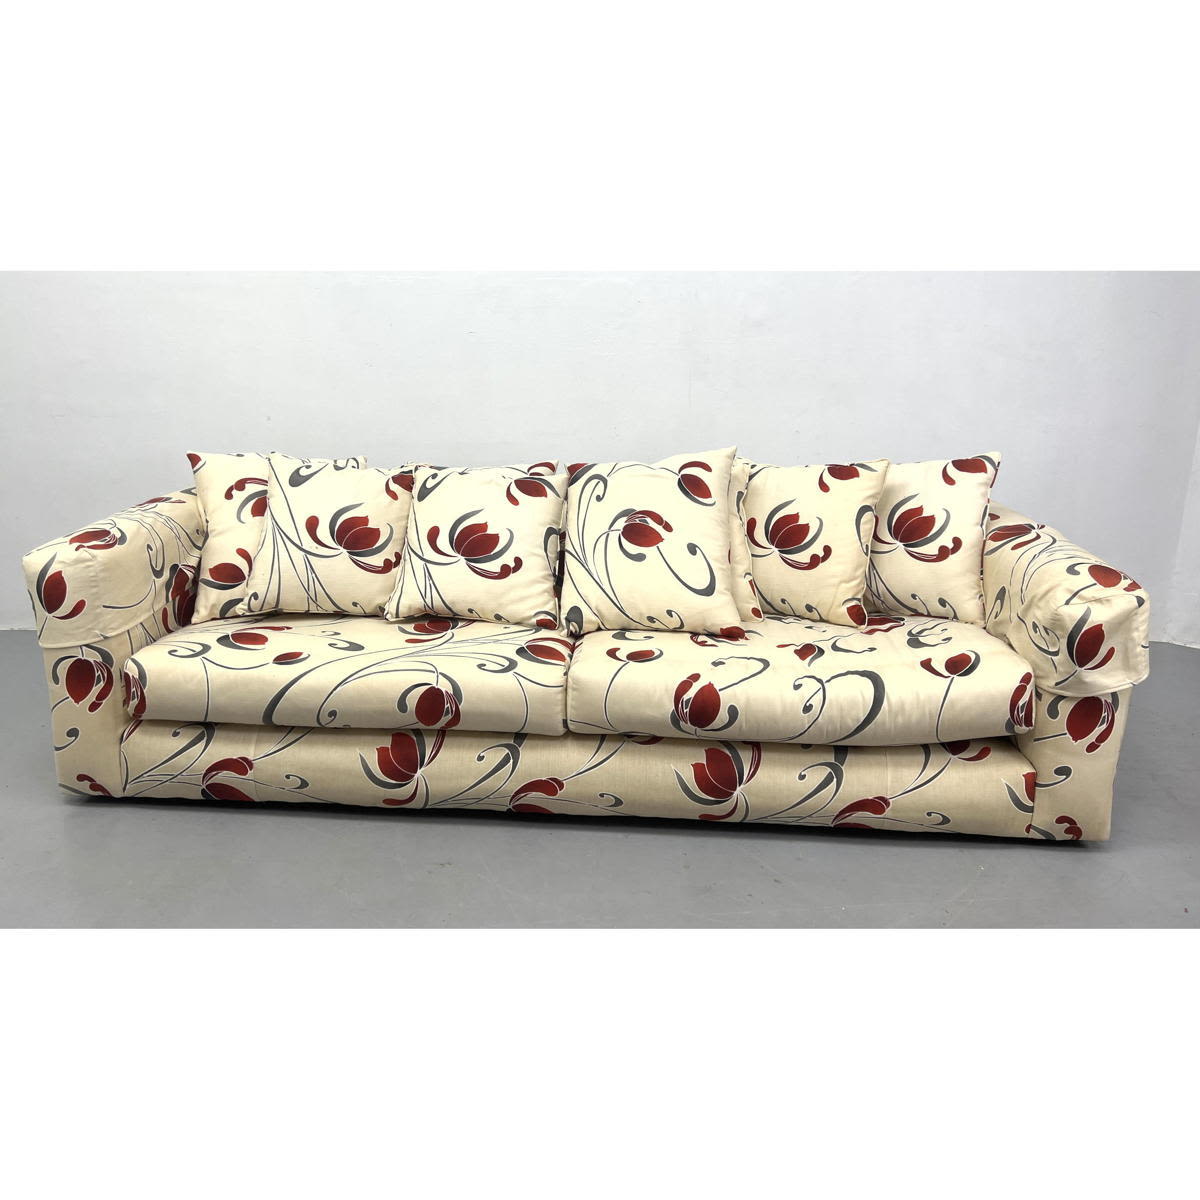 Upholstered Sofa Couch Dimensions  3ad688